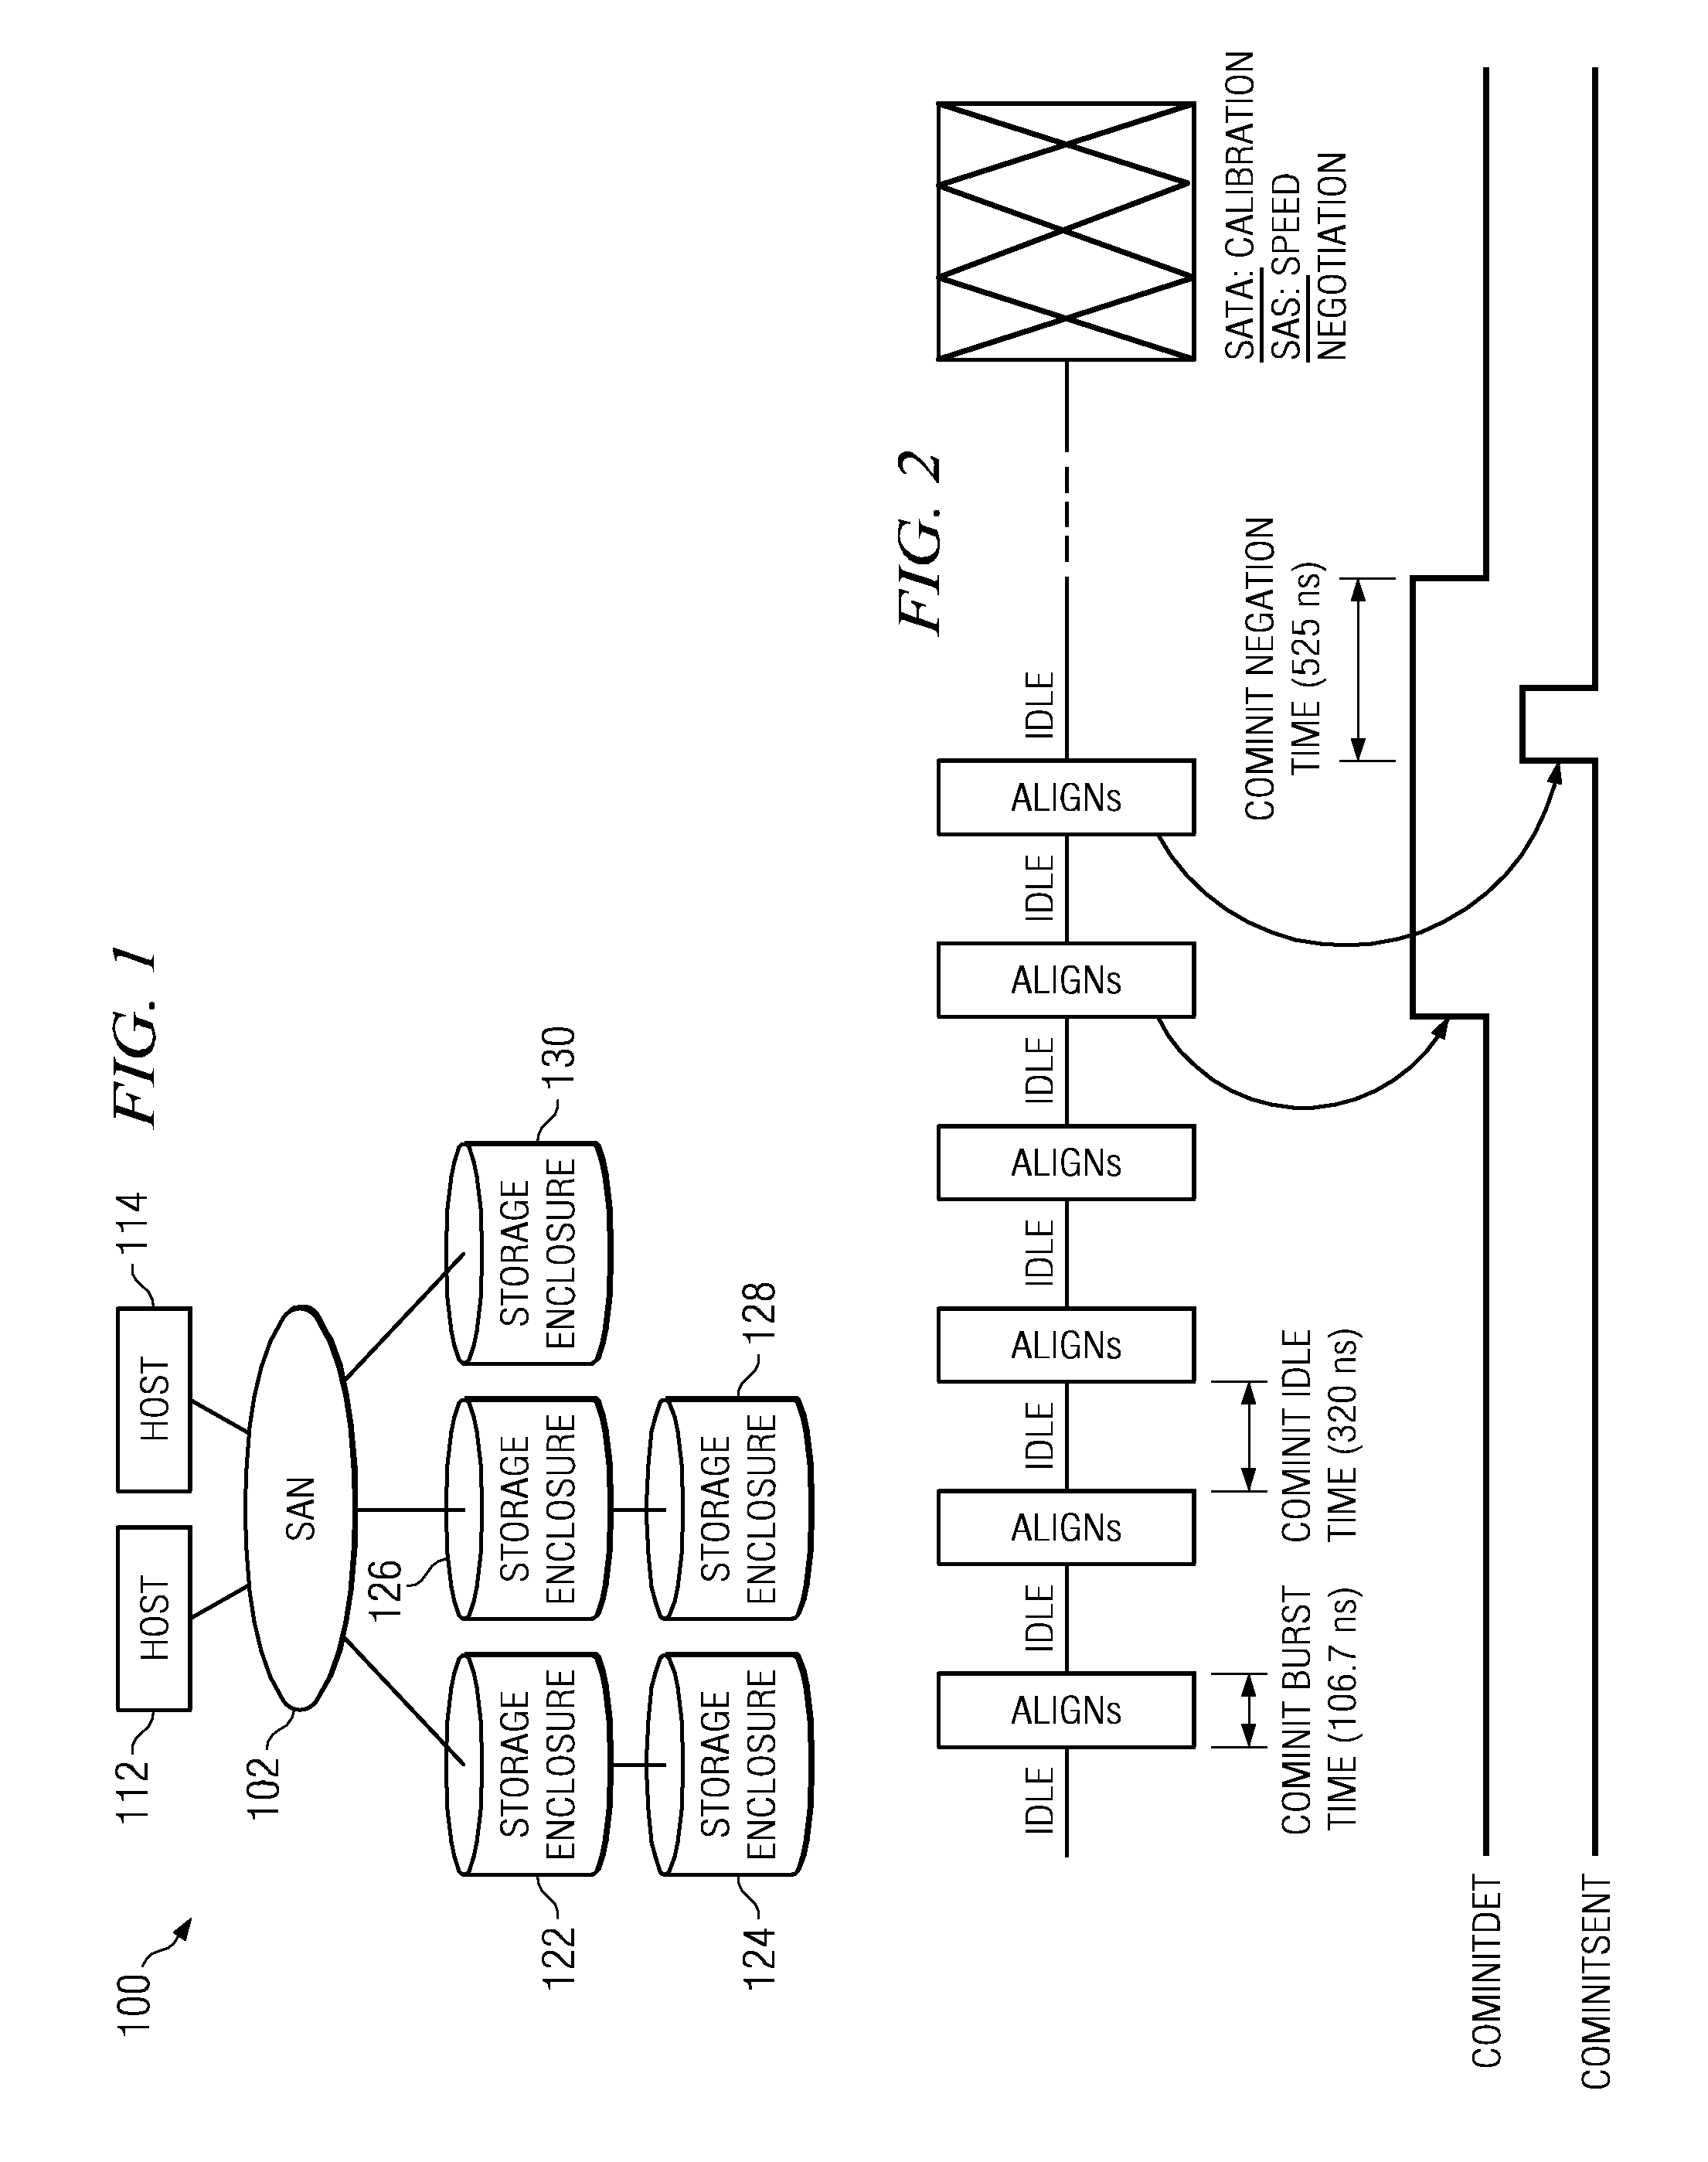 Out-of-Band Signaling Support Over Standard Optical SFP